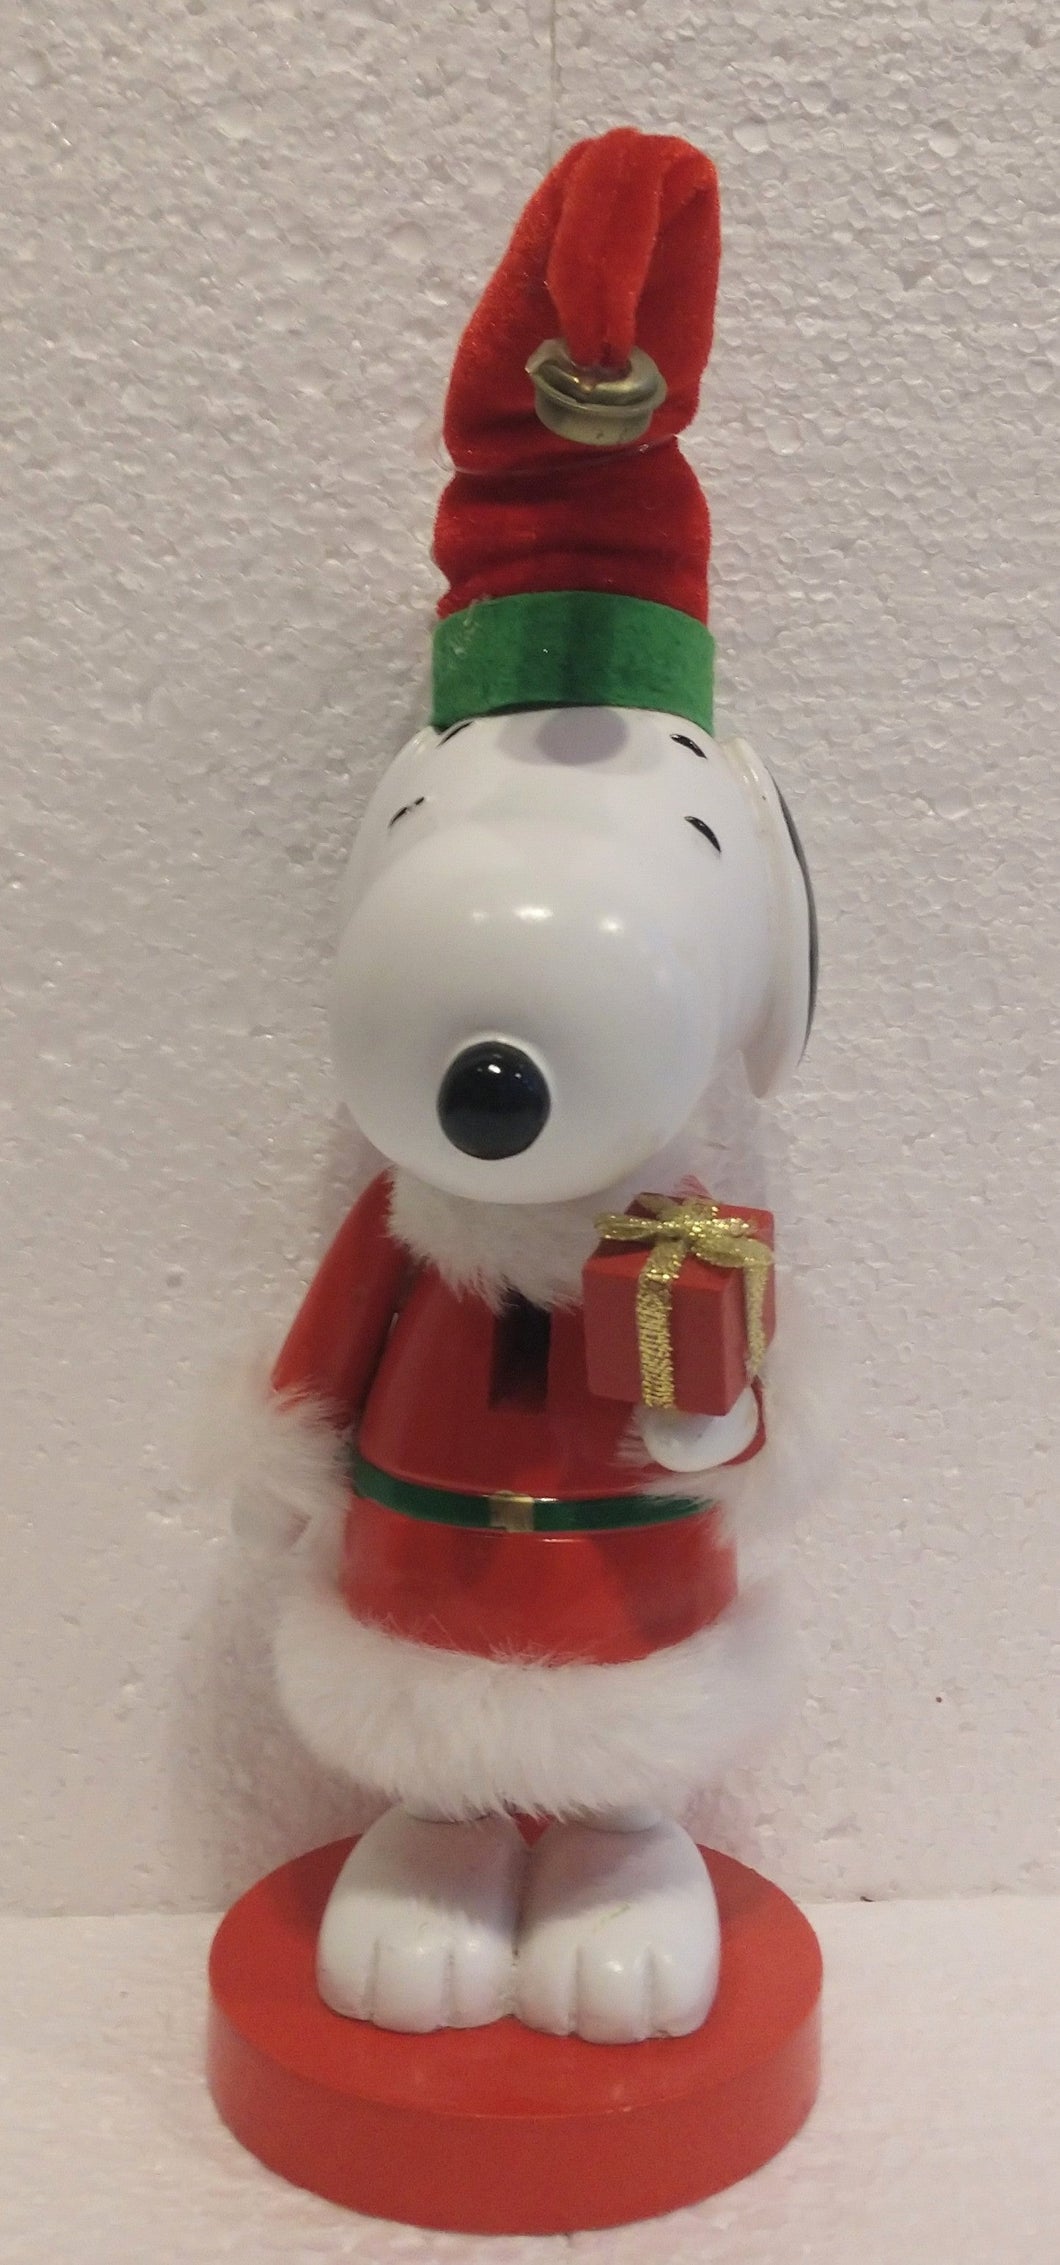 Snoopy Nutcracker in Santa Suit with Christmas Gift 11